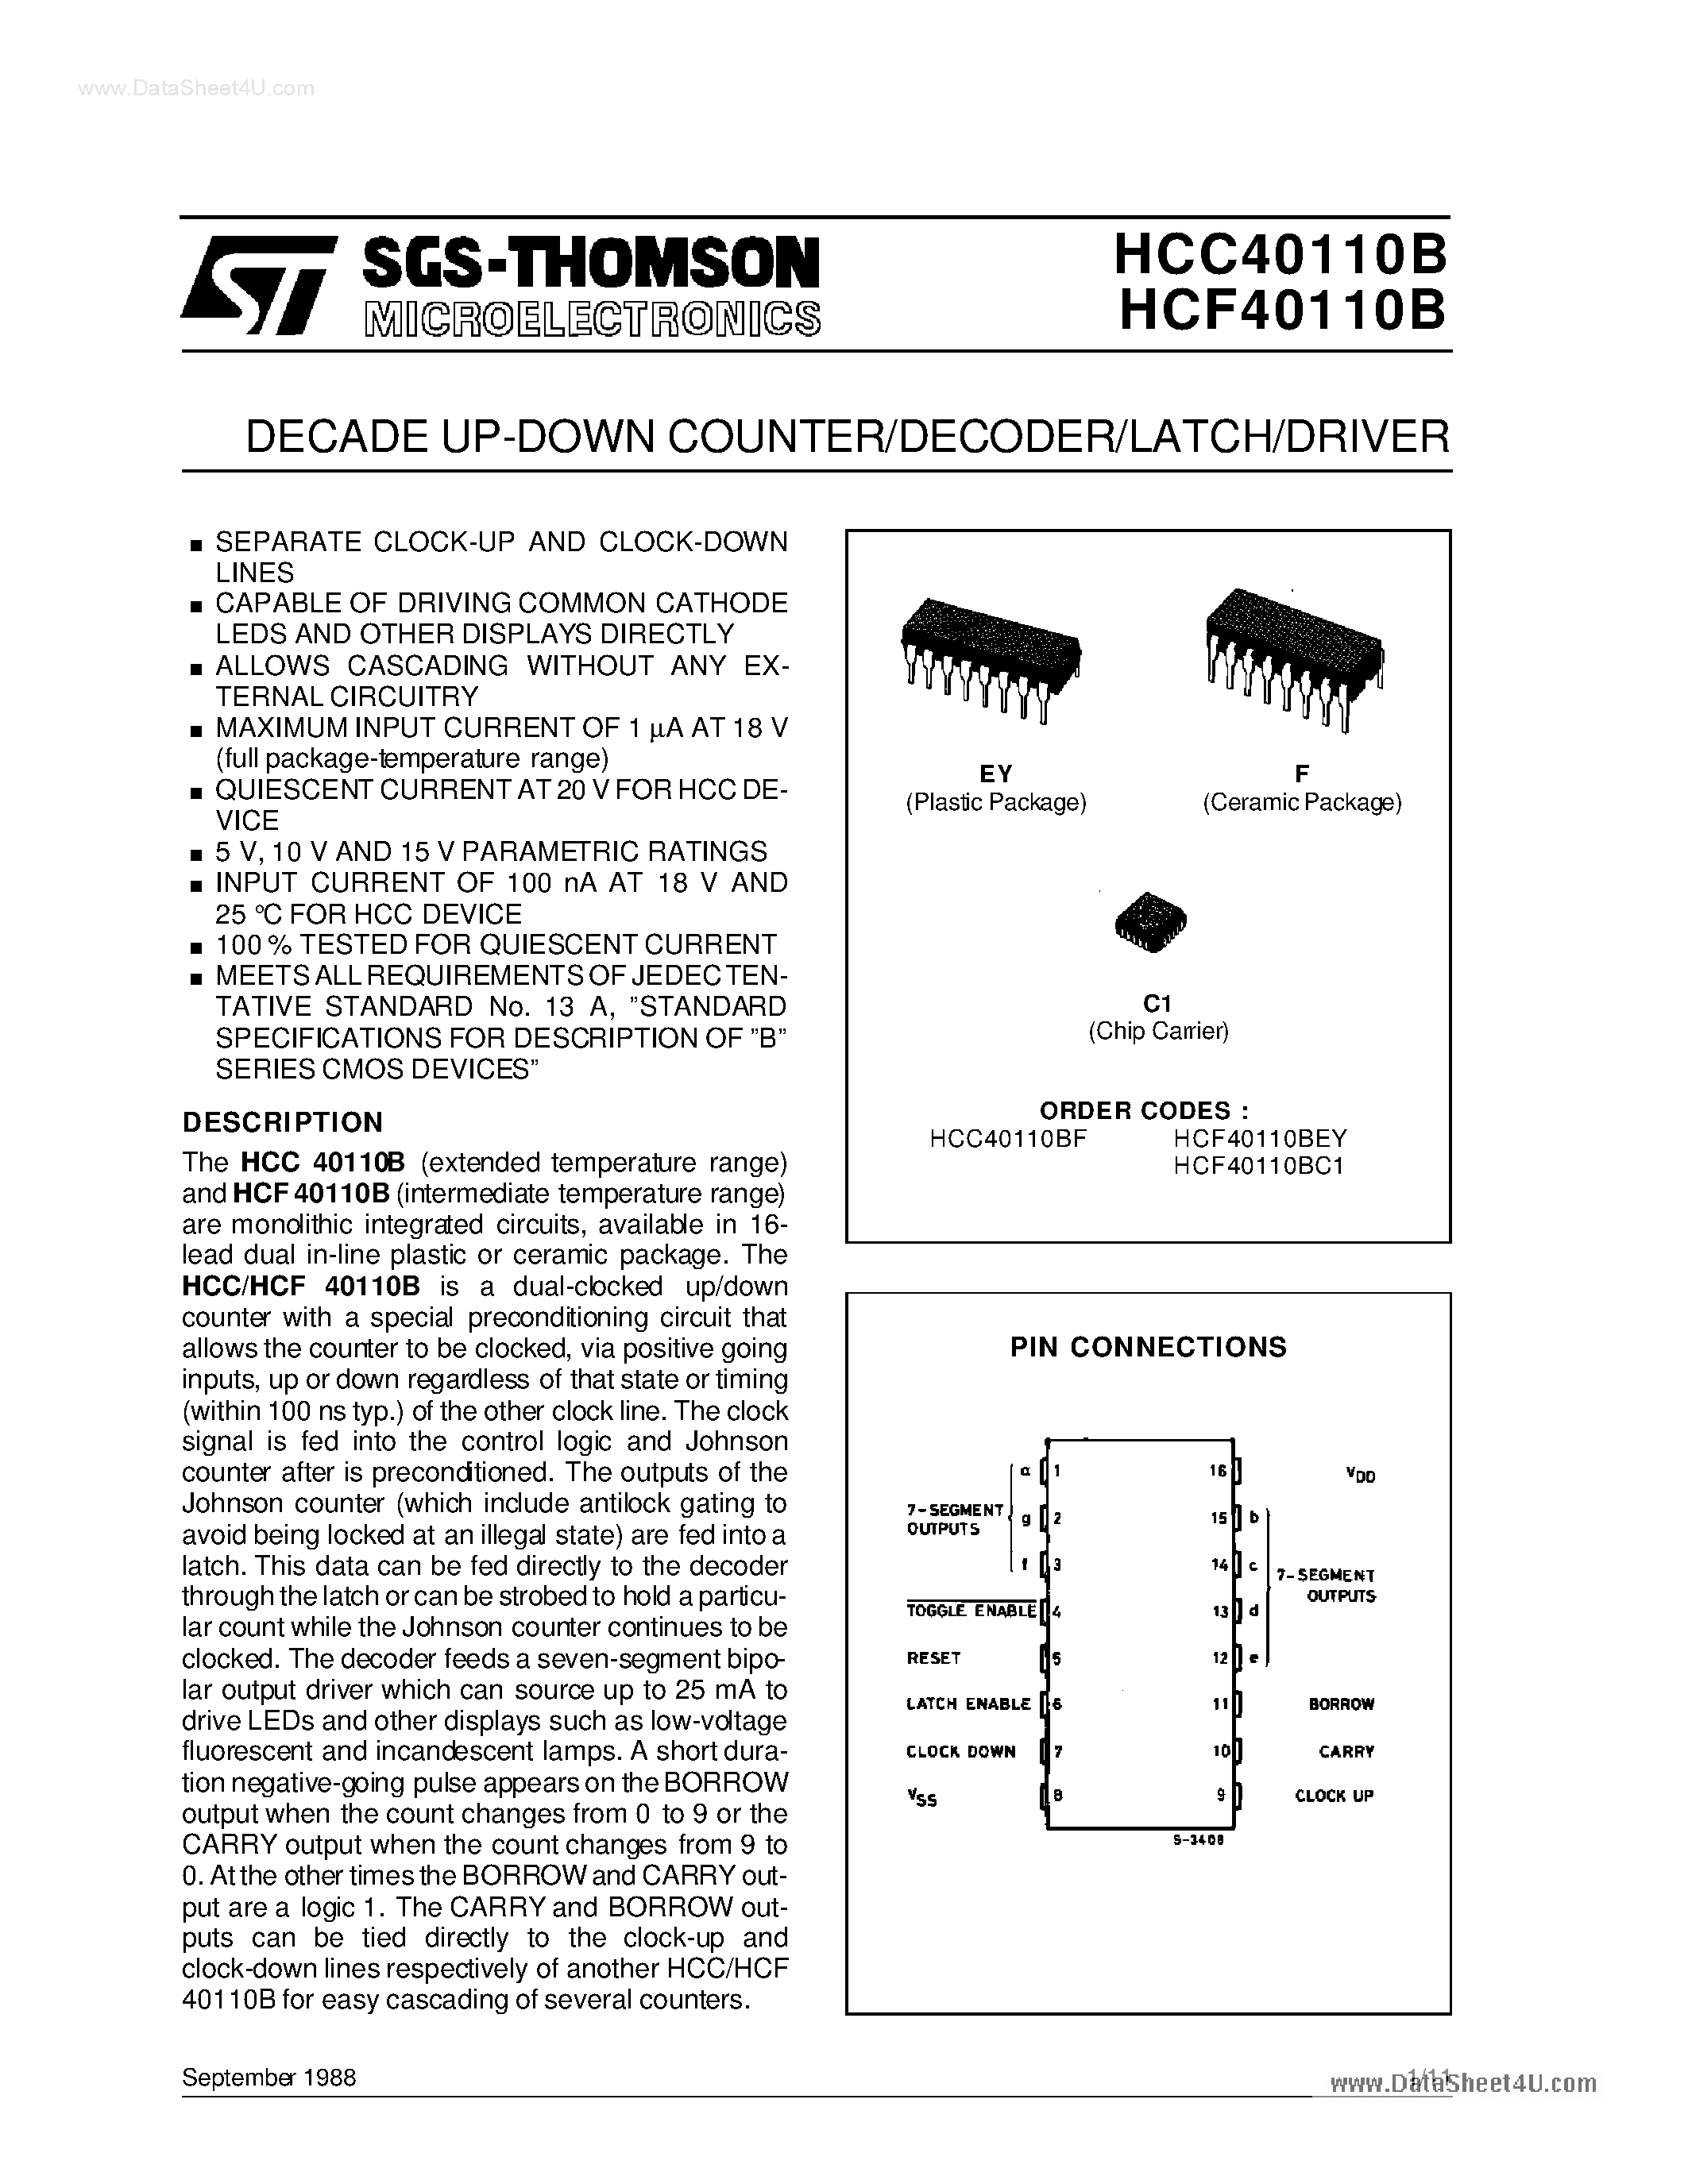 Datasheet 40110BE - Search -----> HCF40110BE page 1